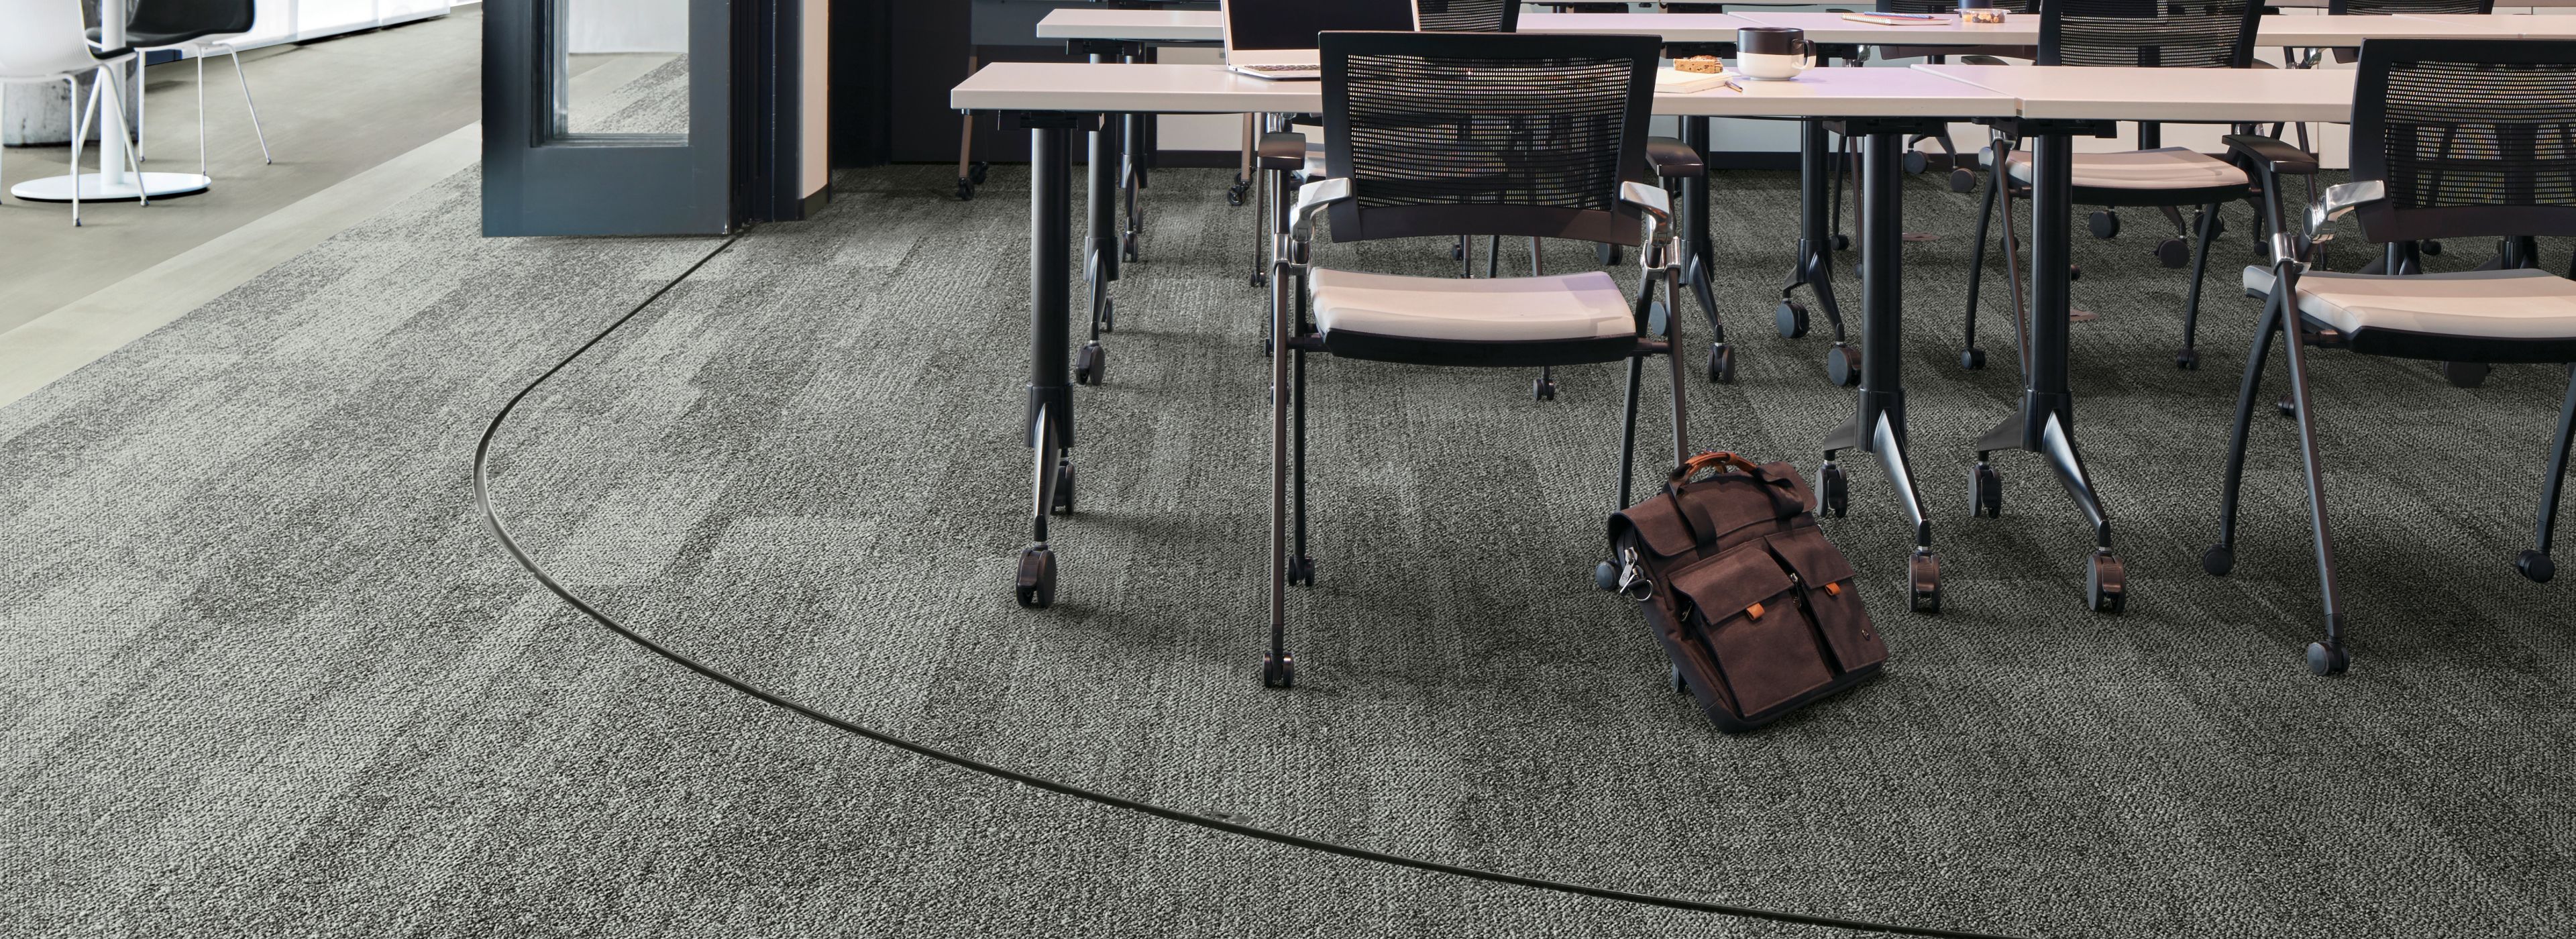 Interface Open Air 410 plank carpet tile in open conference room with satchel leaning on chair image number 1